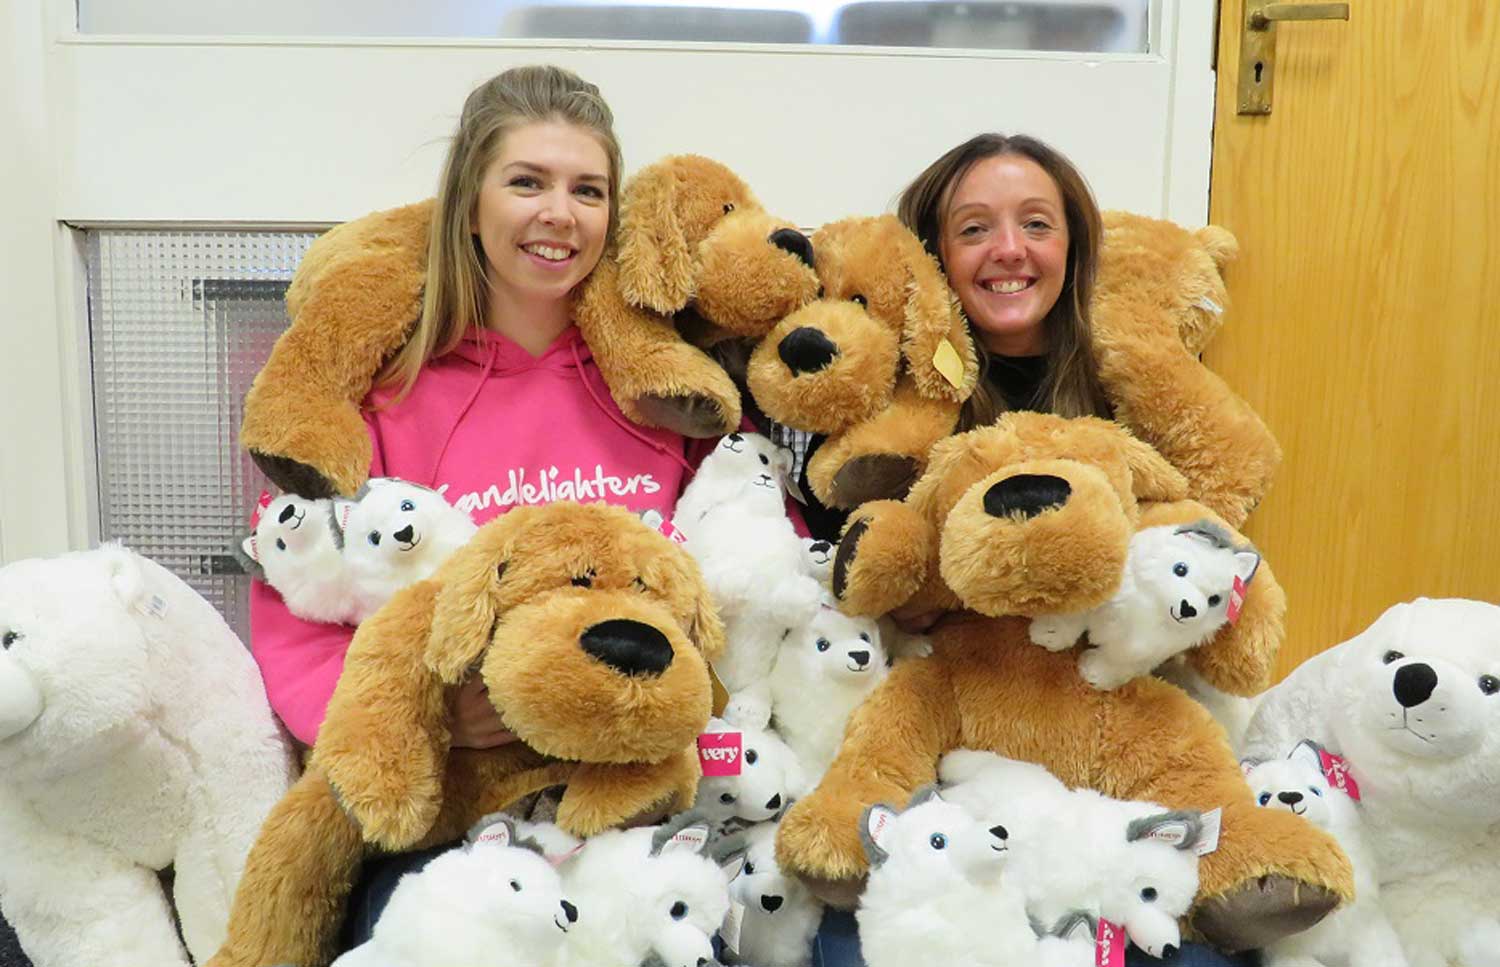 Fundraisers, Jen Aspinall and Gina Trotter, surrounded by cuddly toys looking for new homes